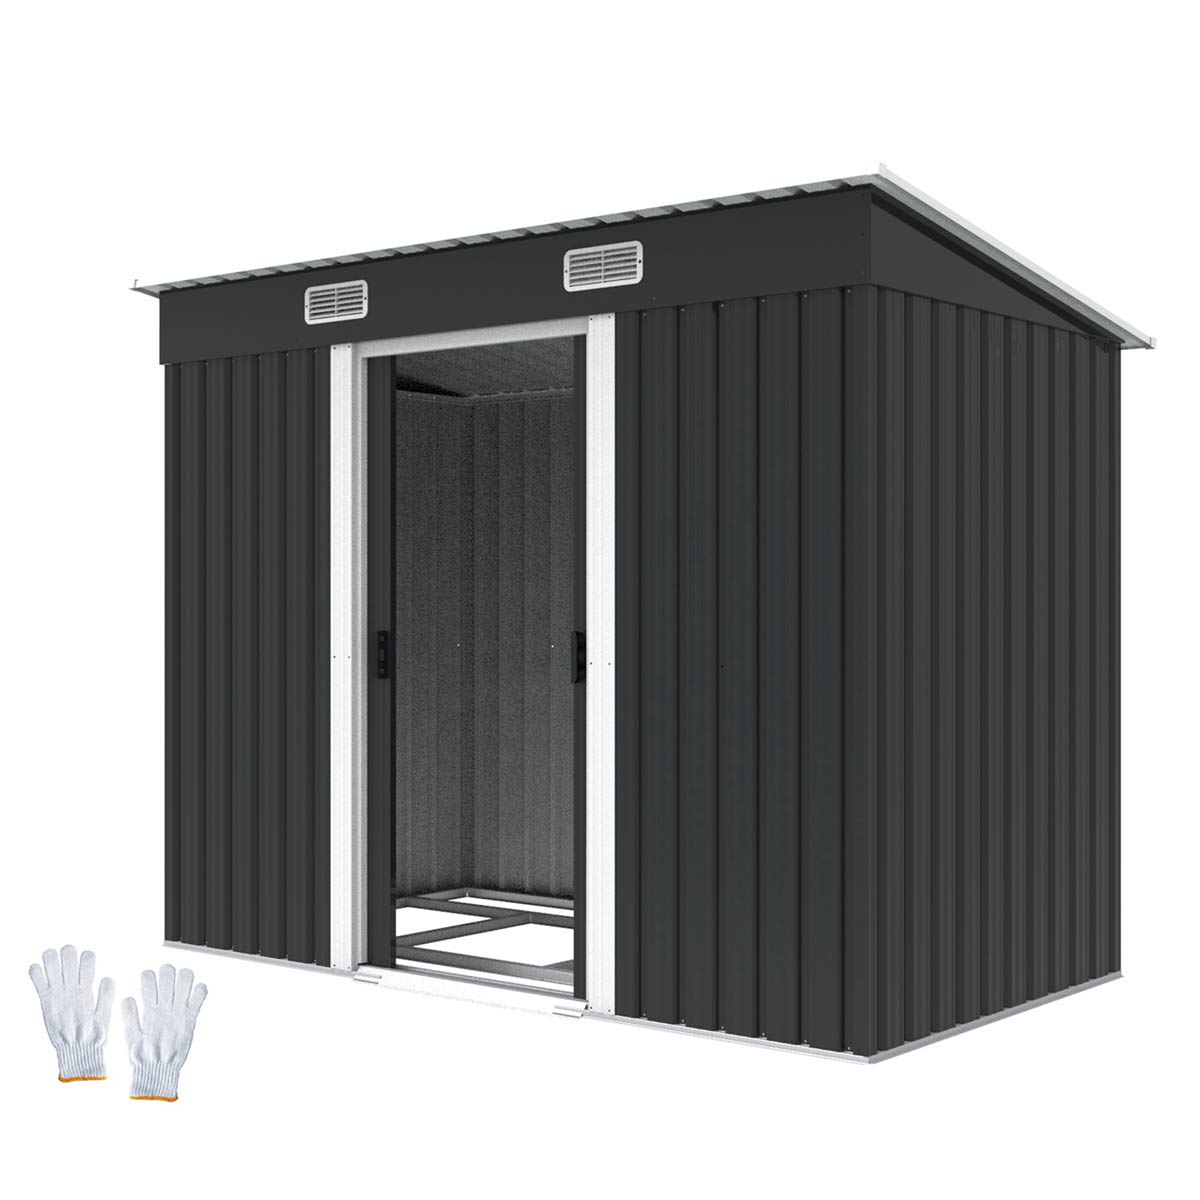 Birchtree Garden Shed Metal Pent Roof 4Ft X 8Ft - Anthracite And White